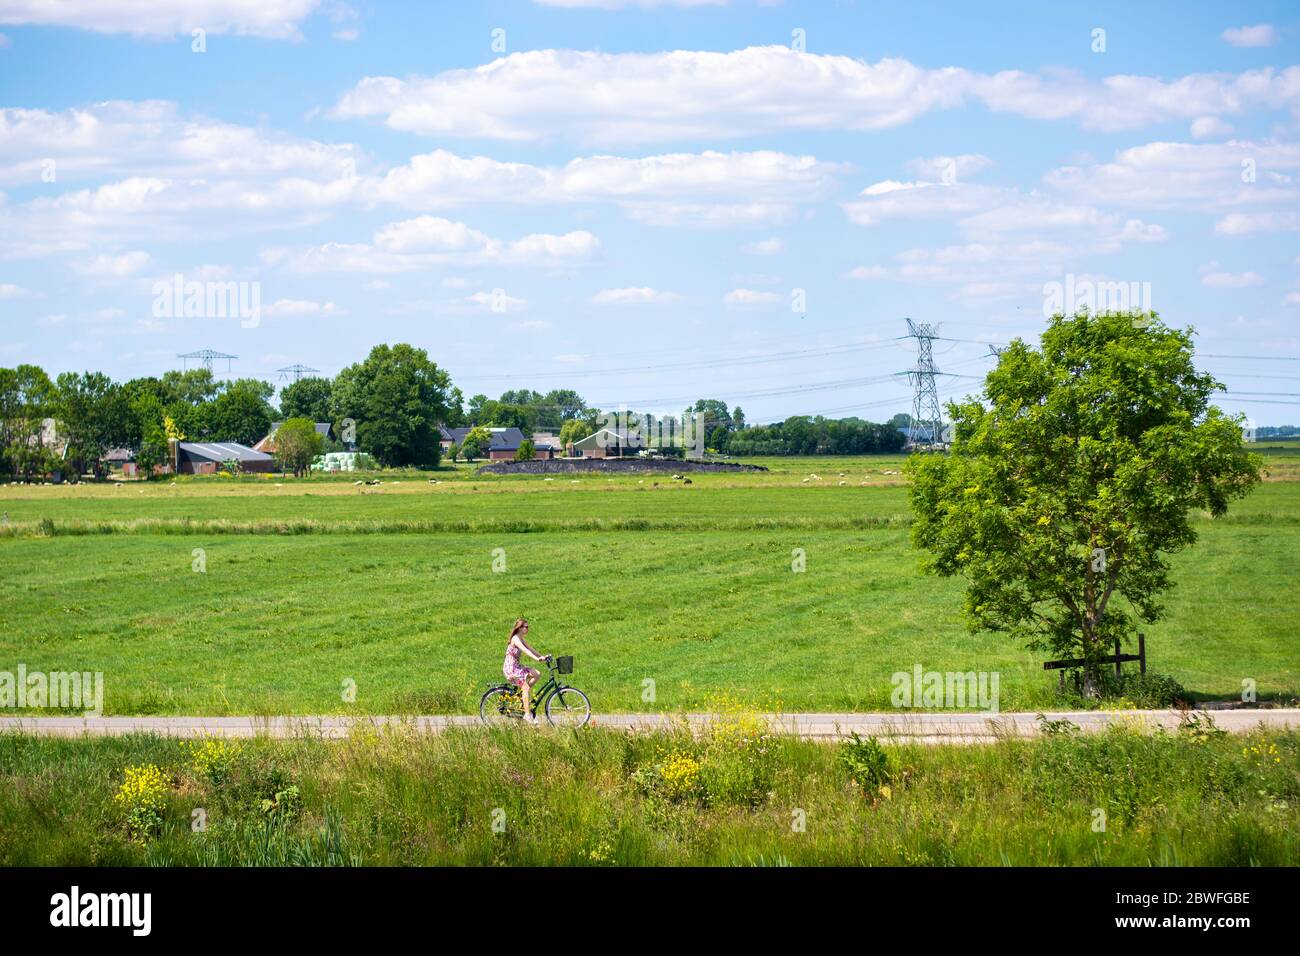 Bike ride in the countryside. Woman wearing summer dress riding bicycle on rural road on a sunny day. Farms with farm animals in the background Stock Photo